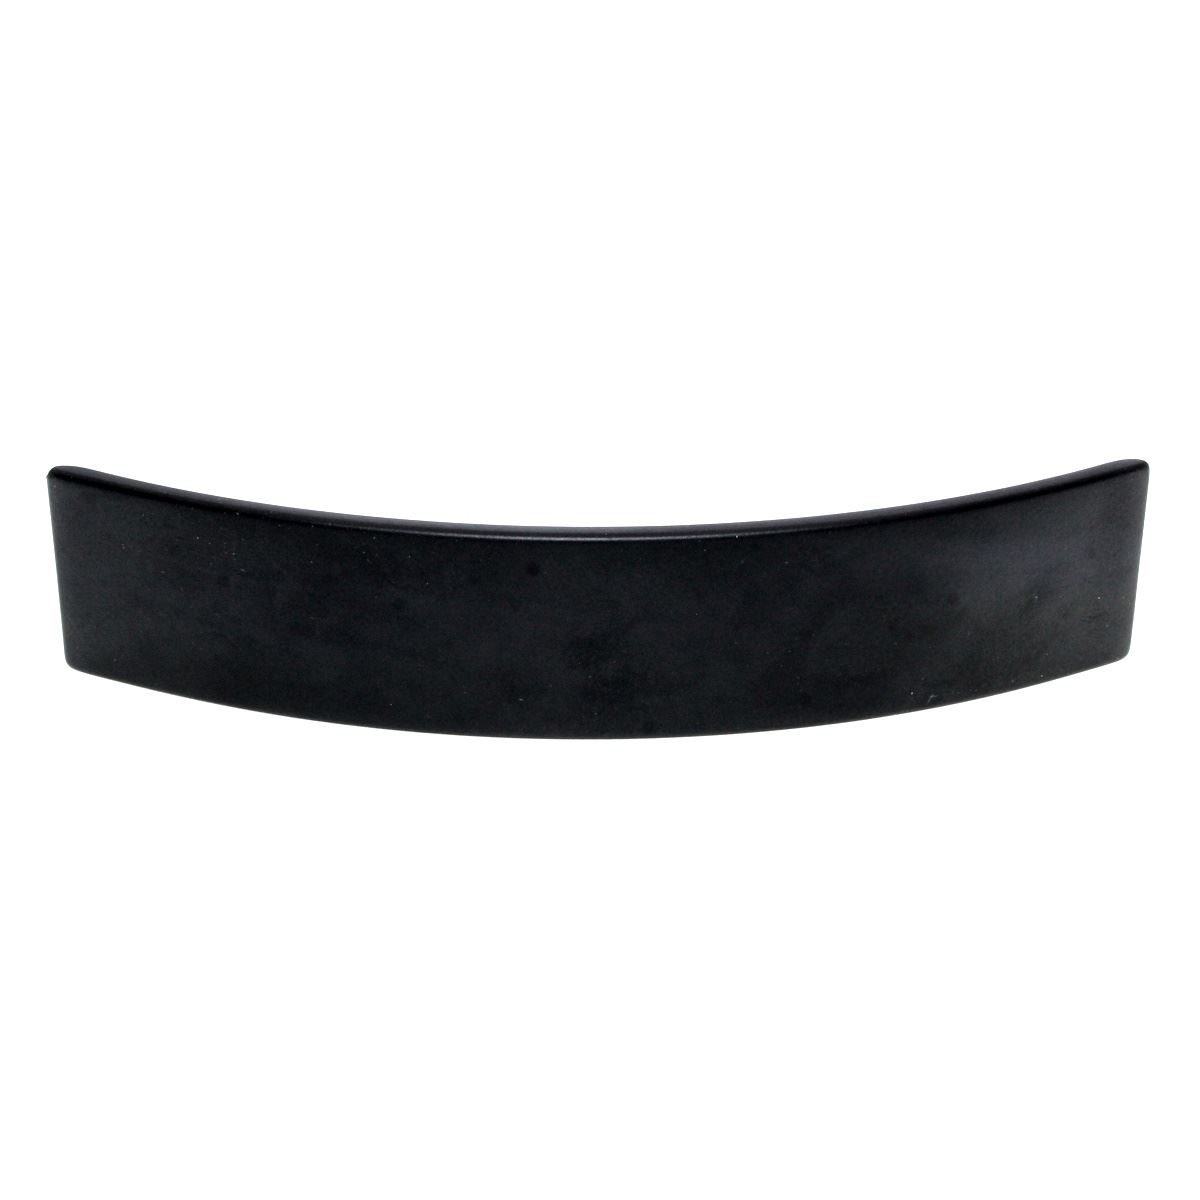 Schaub And Company Armadio Cabinet Arch Pull 5" (128mm) Ctr Matte Black 363-MB